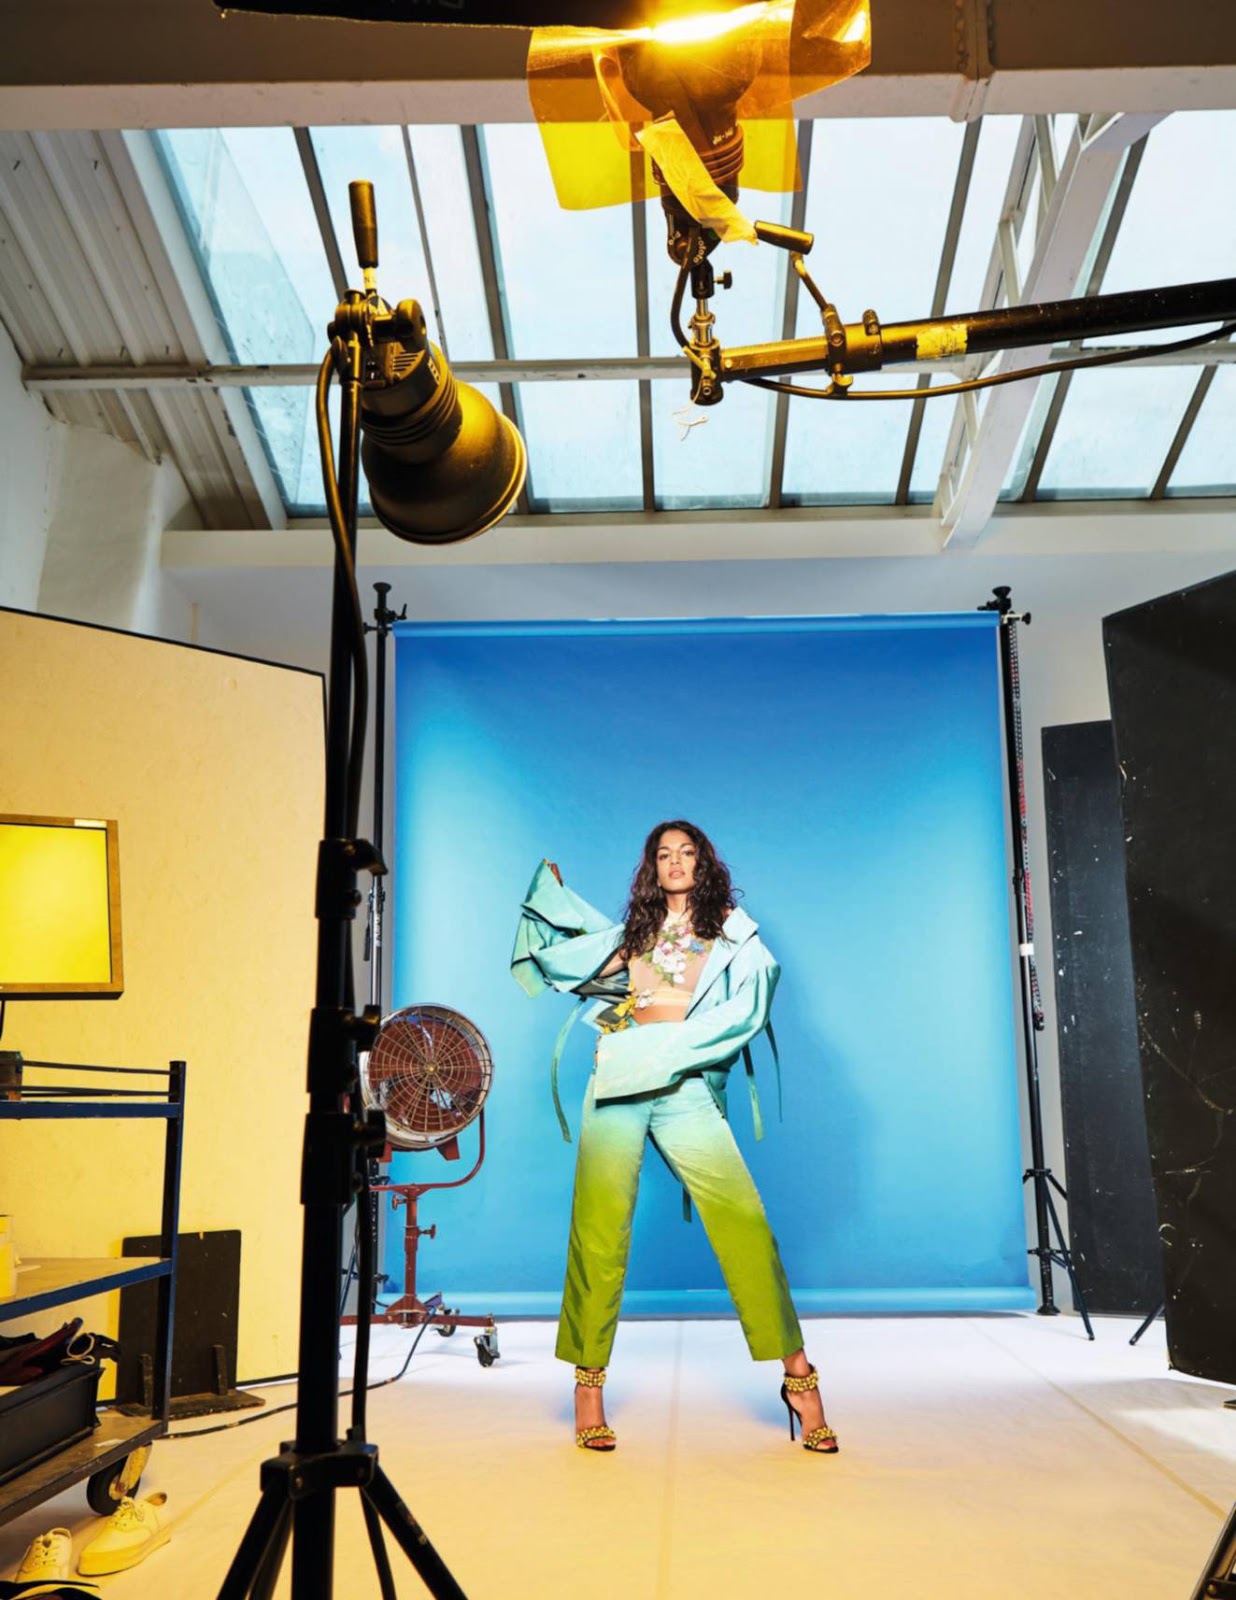 Smile: M.I.A. in Grazia France September 16th-22nd, 2016 by Thomas Nutzl